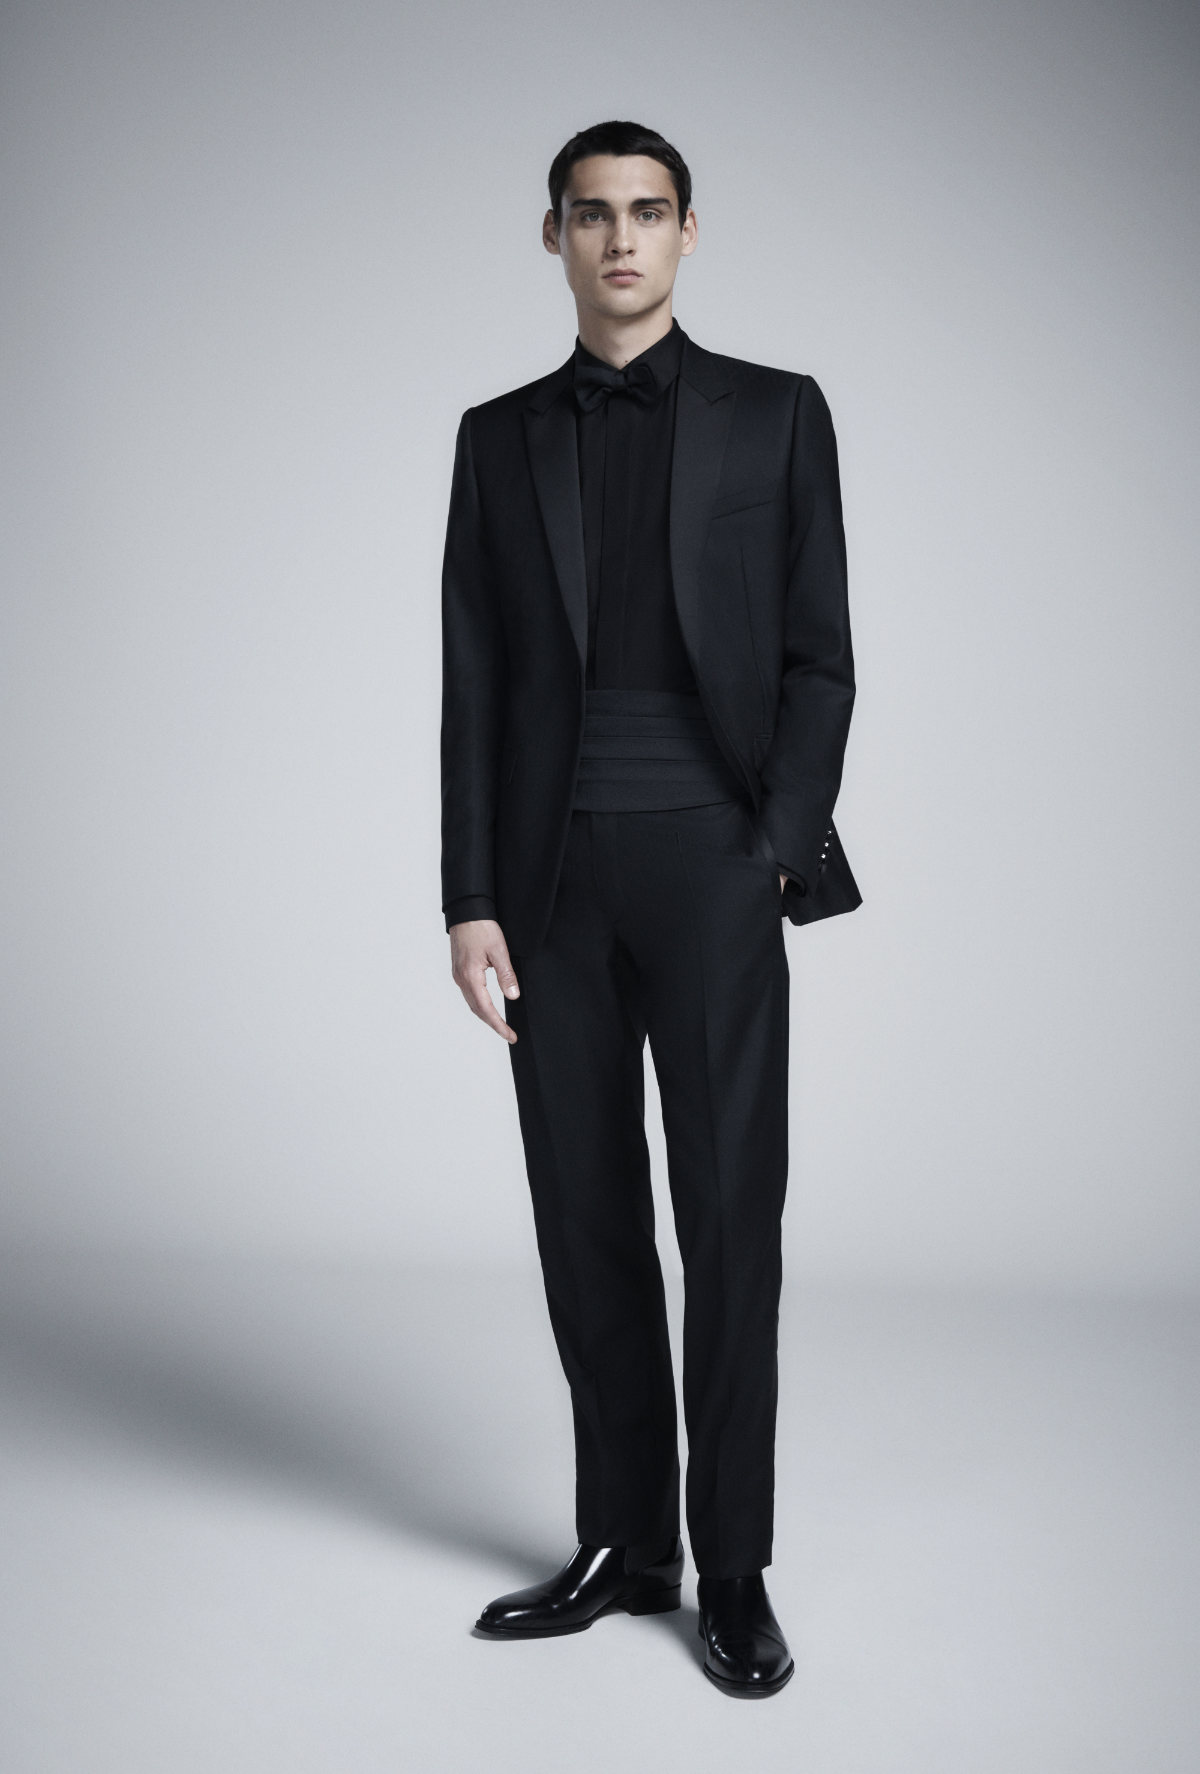 Dior: Dior Presents Its New Men's Spring 2024 Capsule Collection